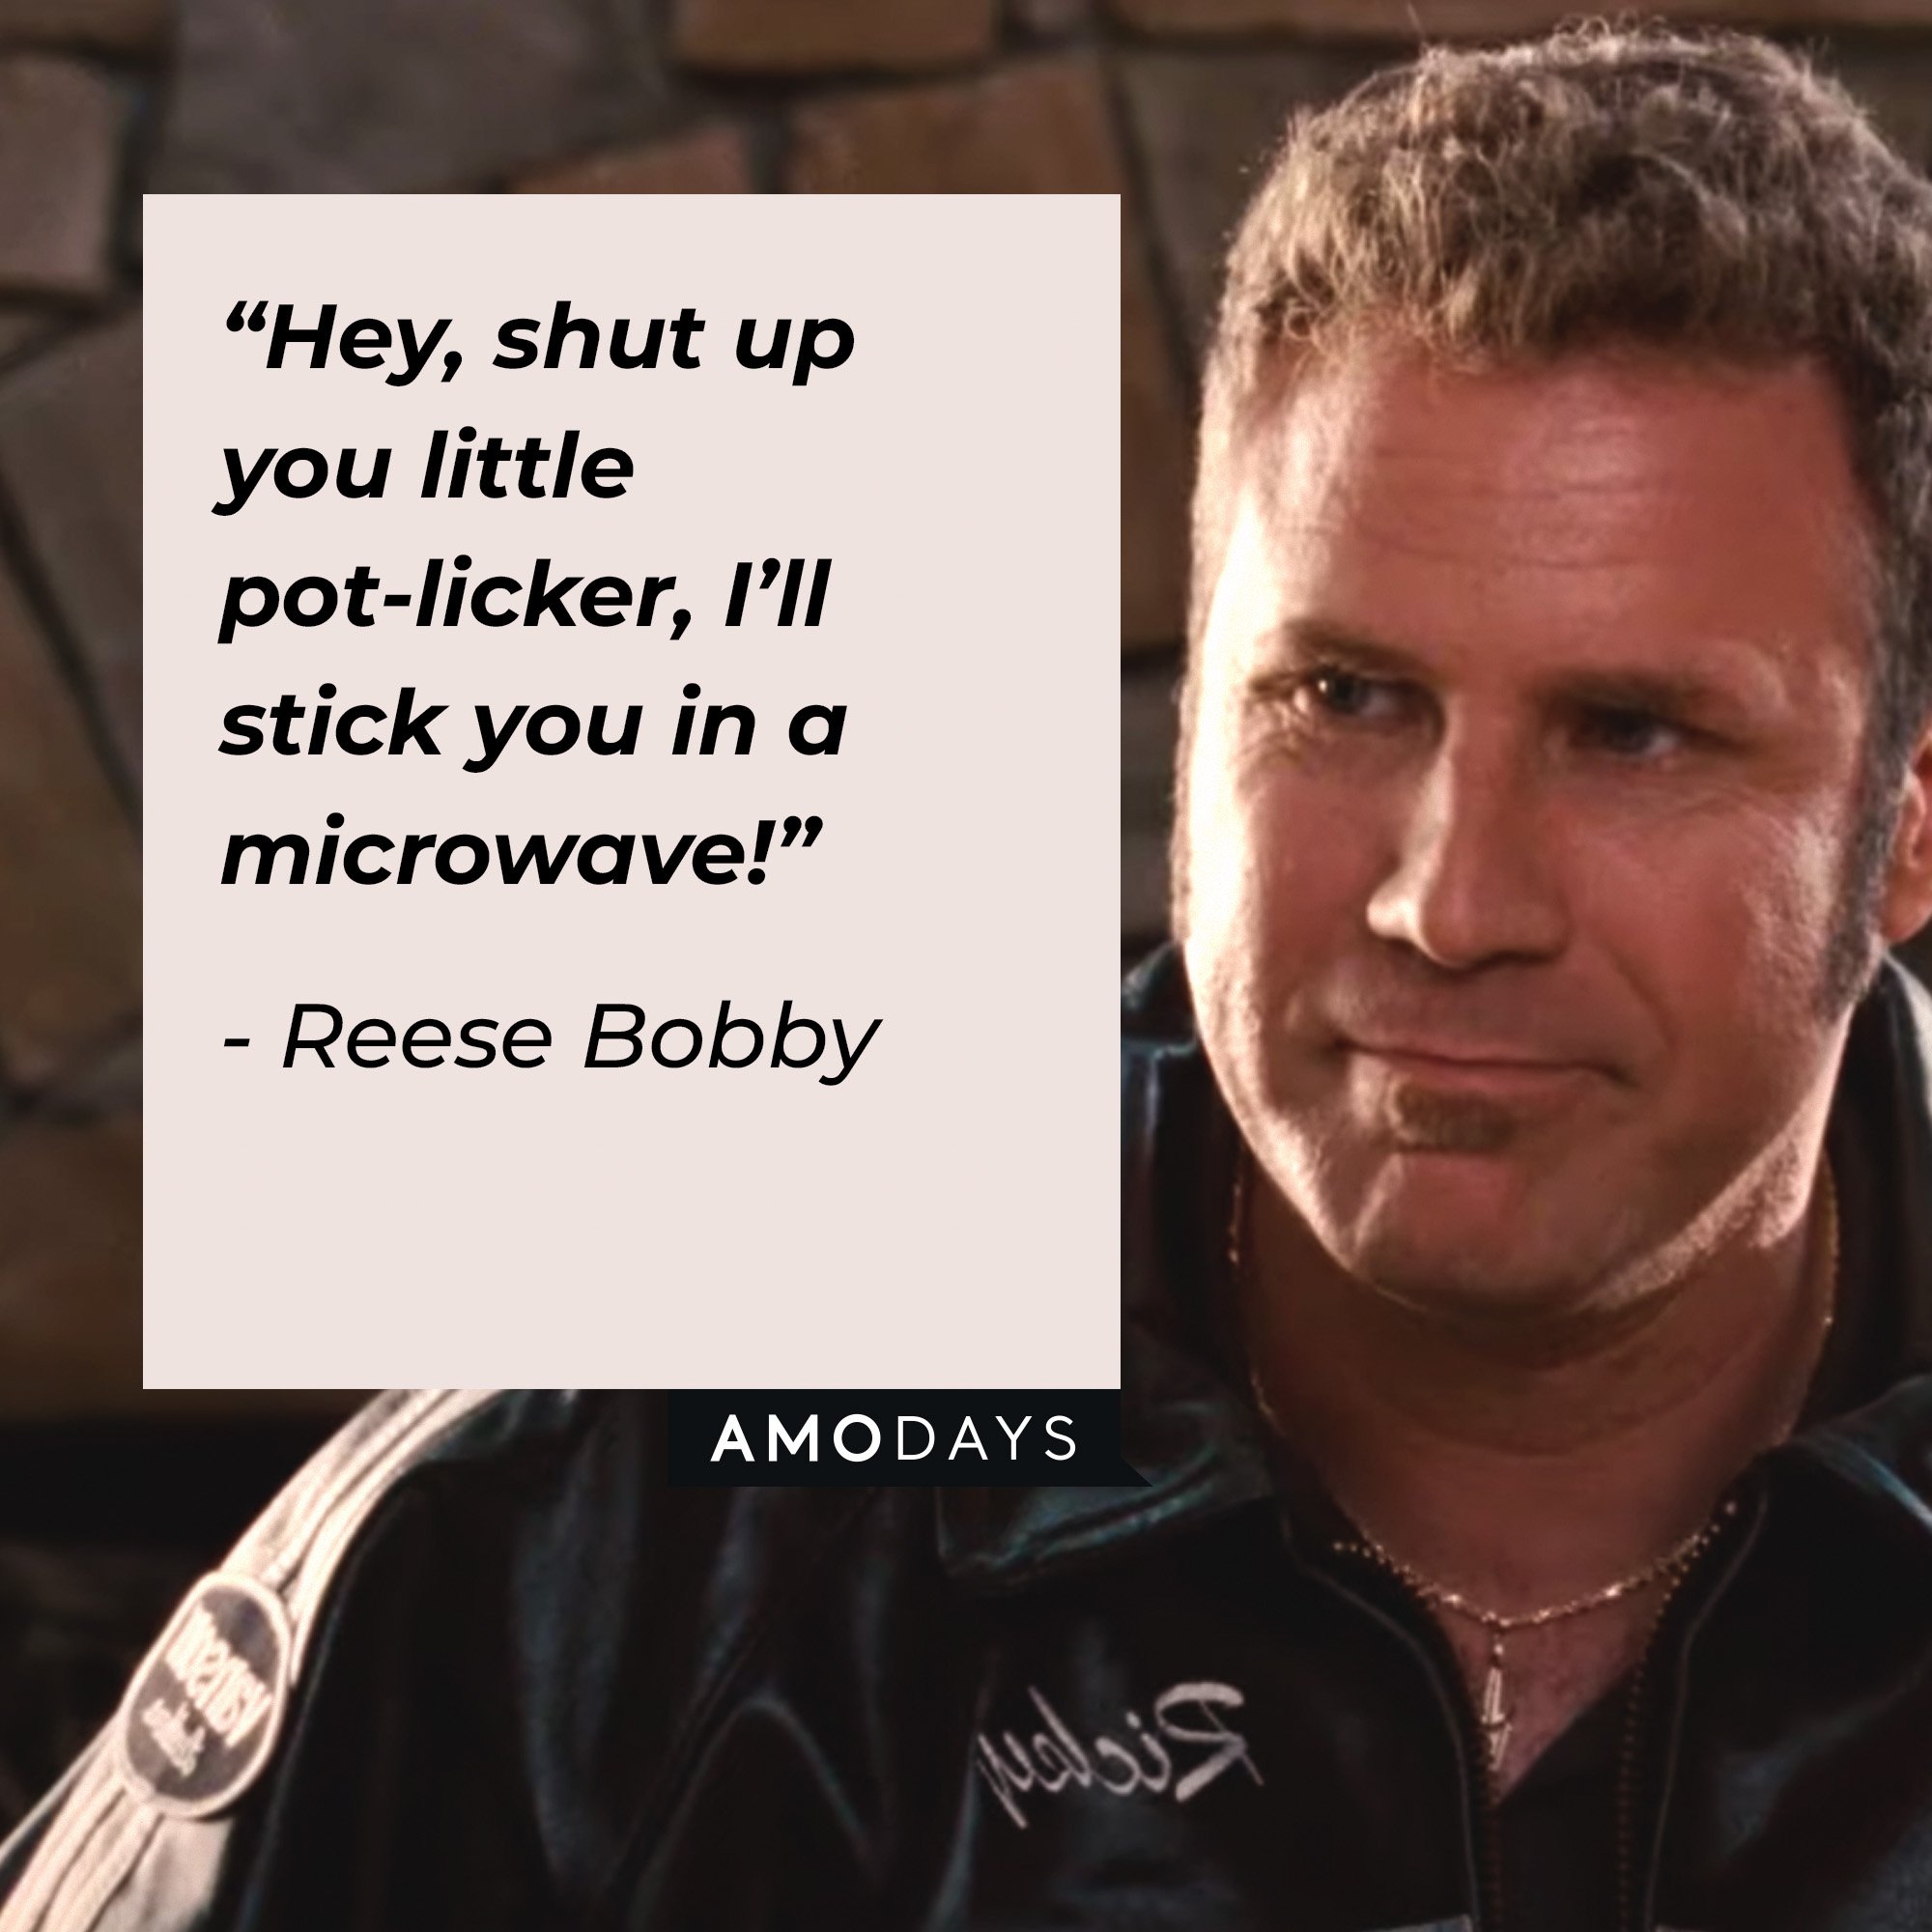 Reese Bobby’s quote: “Hey, shut up you little pot-licker, I’ll stick you in a microwave!” | Image: AmoDays